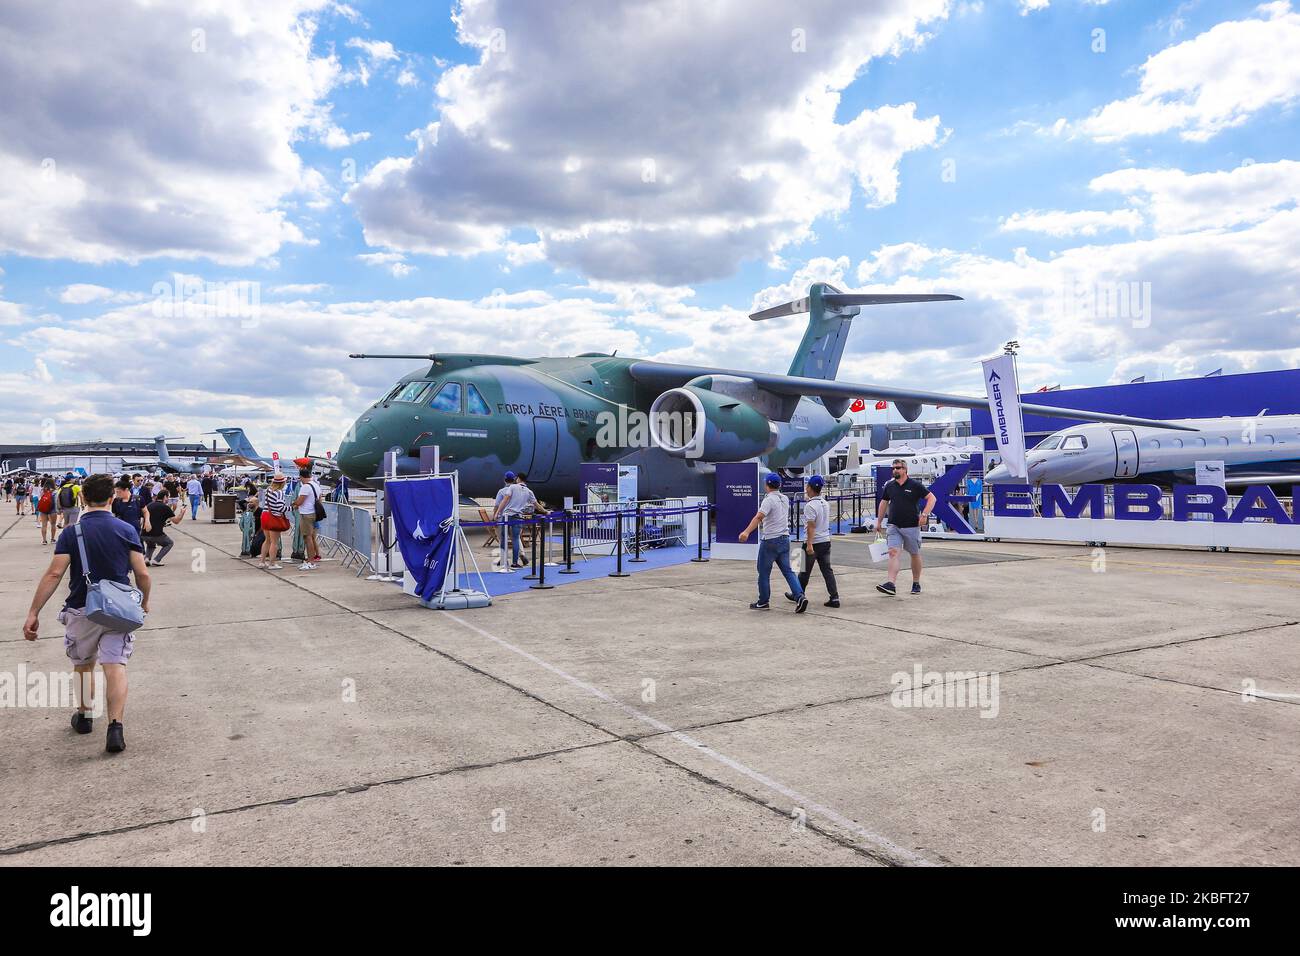 Crowd of visitors at the tarmac of Le Bourget Airport during Paris Air Show 2019 and the Brazilian Air Force Embraer KC-390 renamed after Boeing and Embraer deal as C-390 Millennium, the made in Brazil medium sized transport aircraft as seen on 53rd Paris Air Show Le Bourget in France on June 21, 2019. It is made by Brazilian aerospace manufacturer Embraer Defense and Security with its first flight on February 3, 2019. The military multipurpose airplane for cargo, aerialrefueling and troops can carry 26 tonnes in its fuselage and the 2x IAE V2500 jet engines. The aircraft registration is PT-ZN Stock Photo